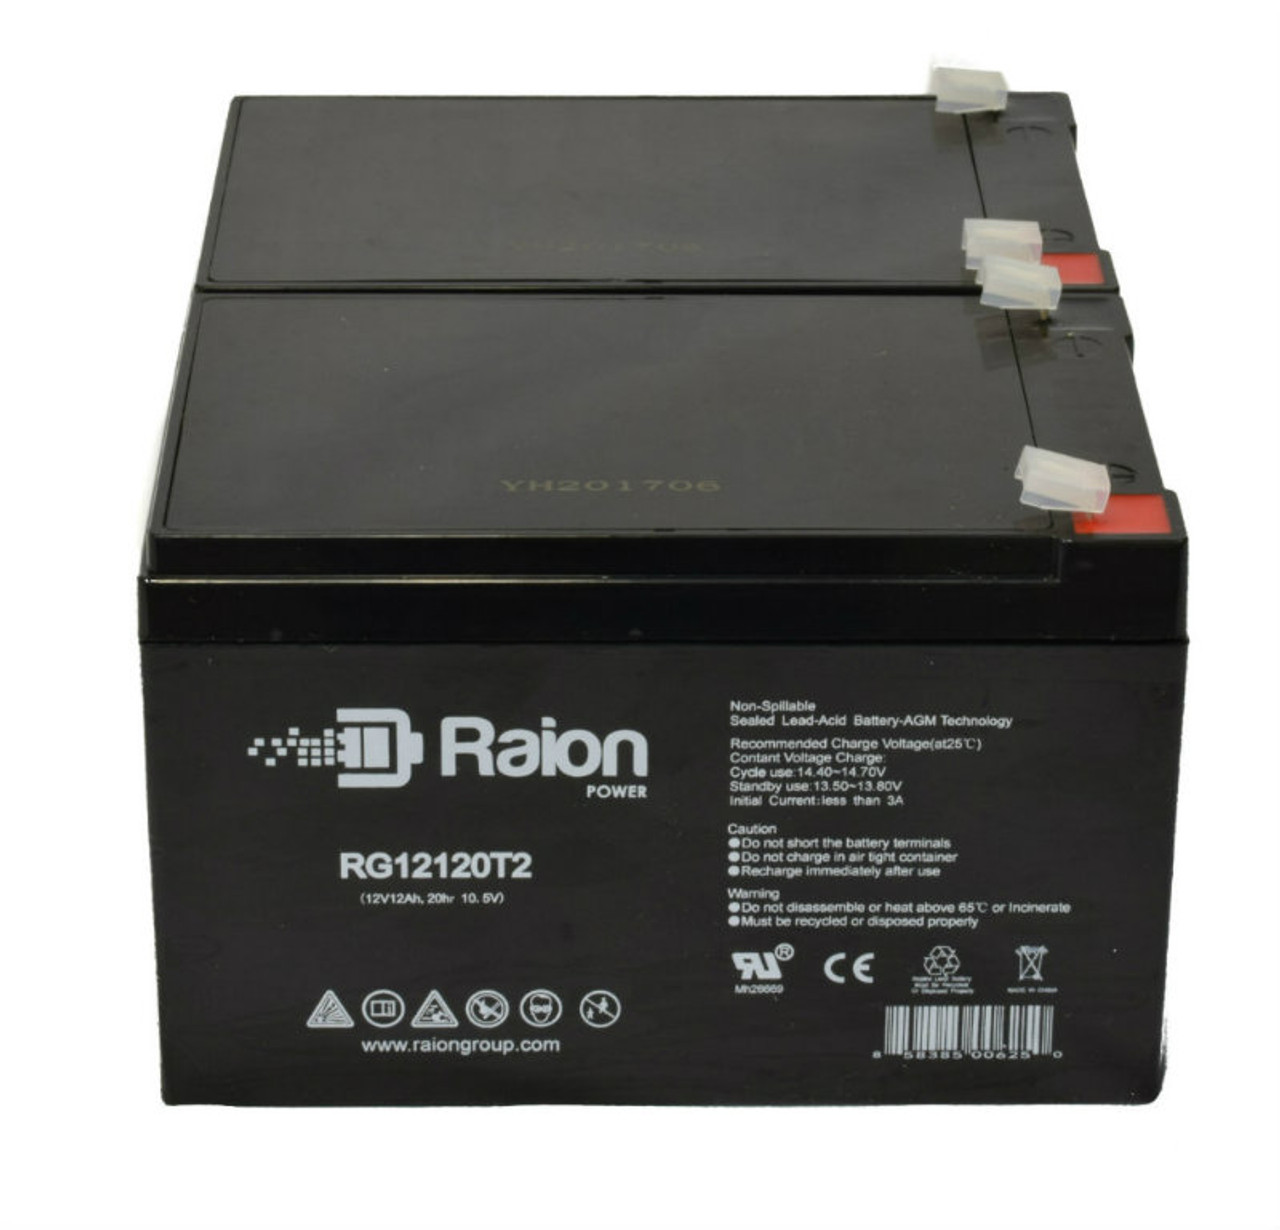 Raion Power 12V 12Ah Non-Spillable Compatible Replacement Battery for X-treme X-11 - (2 Pack)